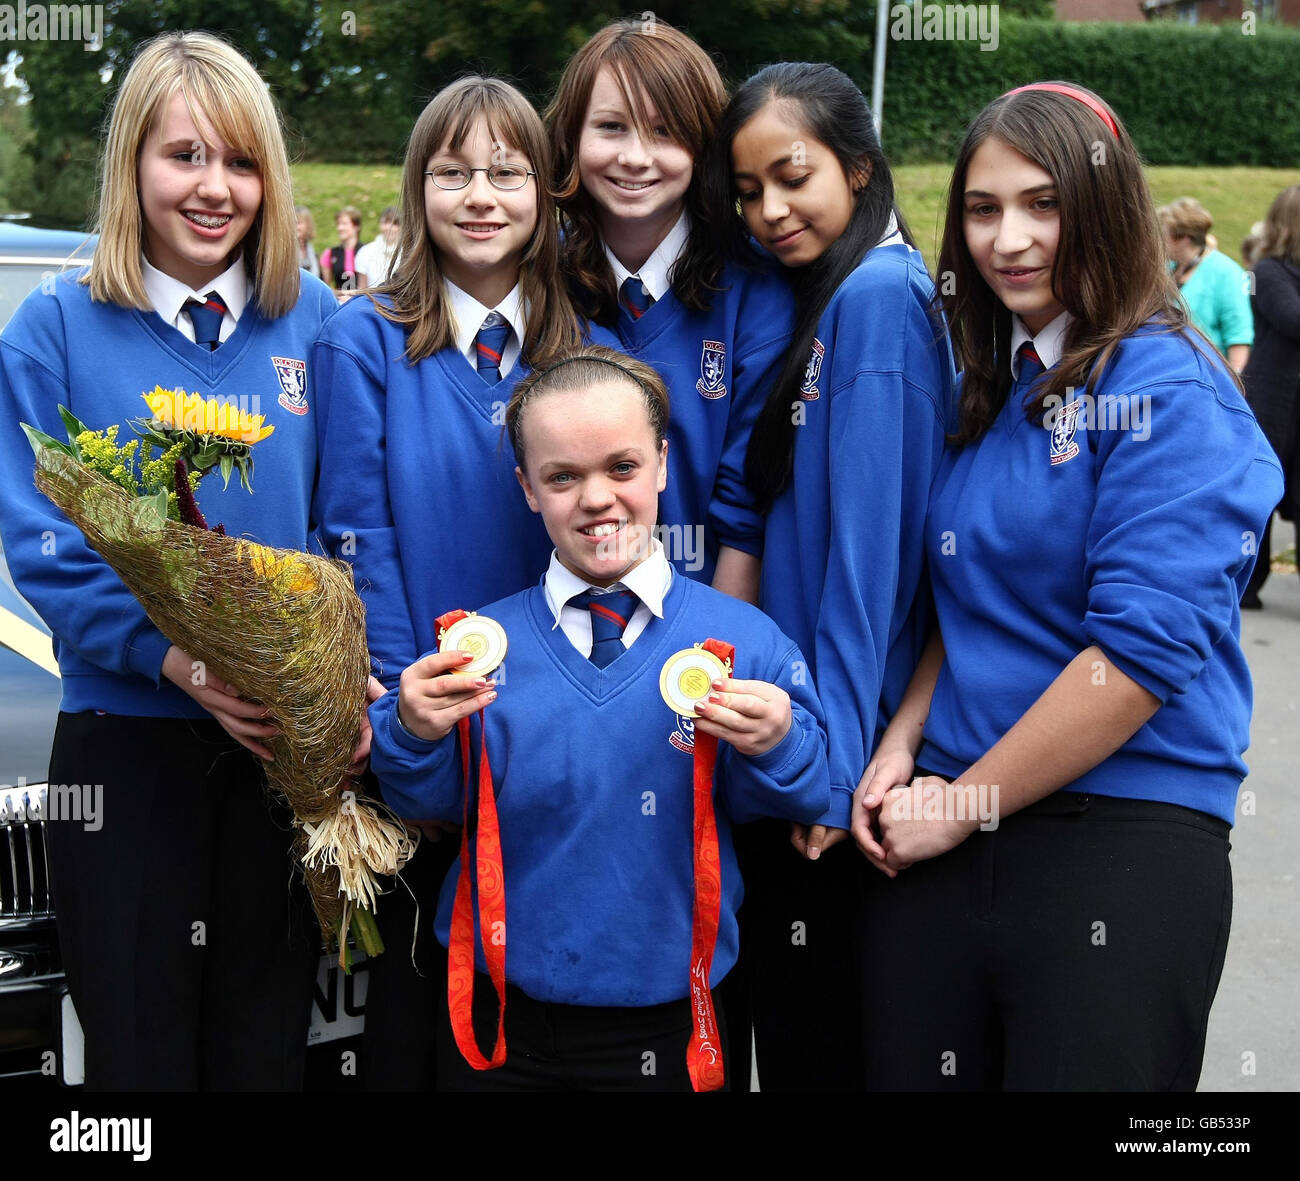 Paralympic swimmer Eleanor Simmonds, who is Britain's youngest ever individual Paralympic gold medallist, is welcomed back by classmates Amber Evans, Sophie Adams, Natasha Lacey, Samia Rossaye and Cara D'Alesio as she returns to Olchfa School in Swansea. Stock Photo